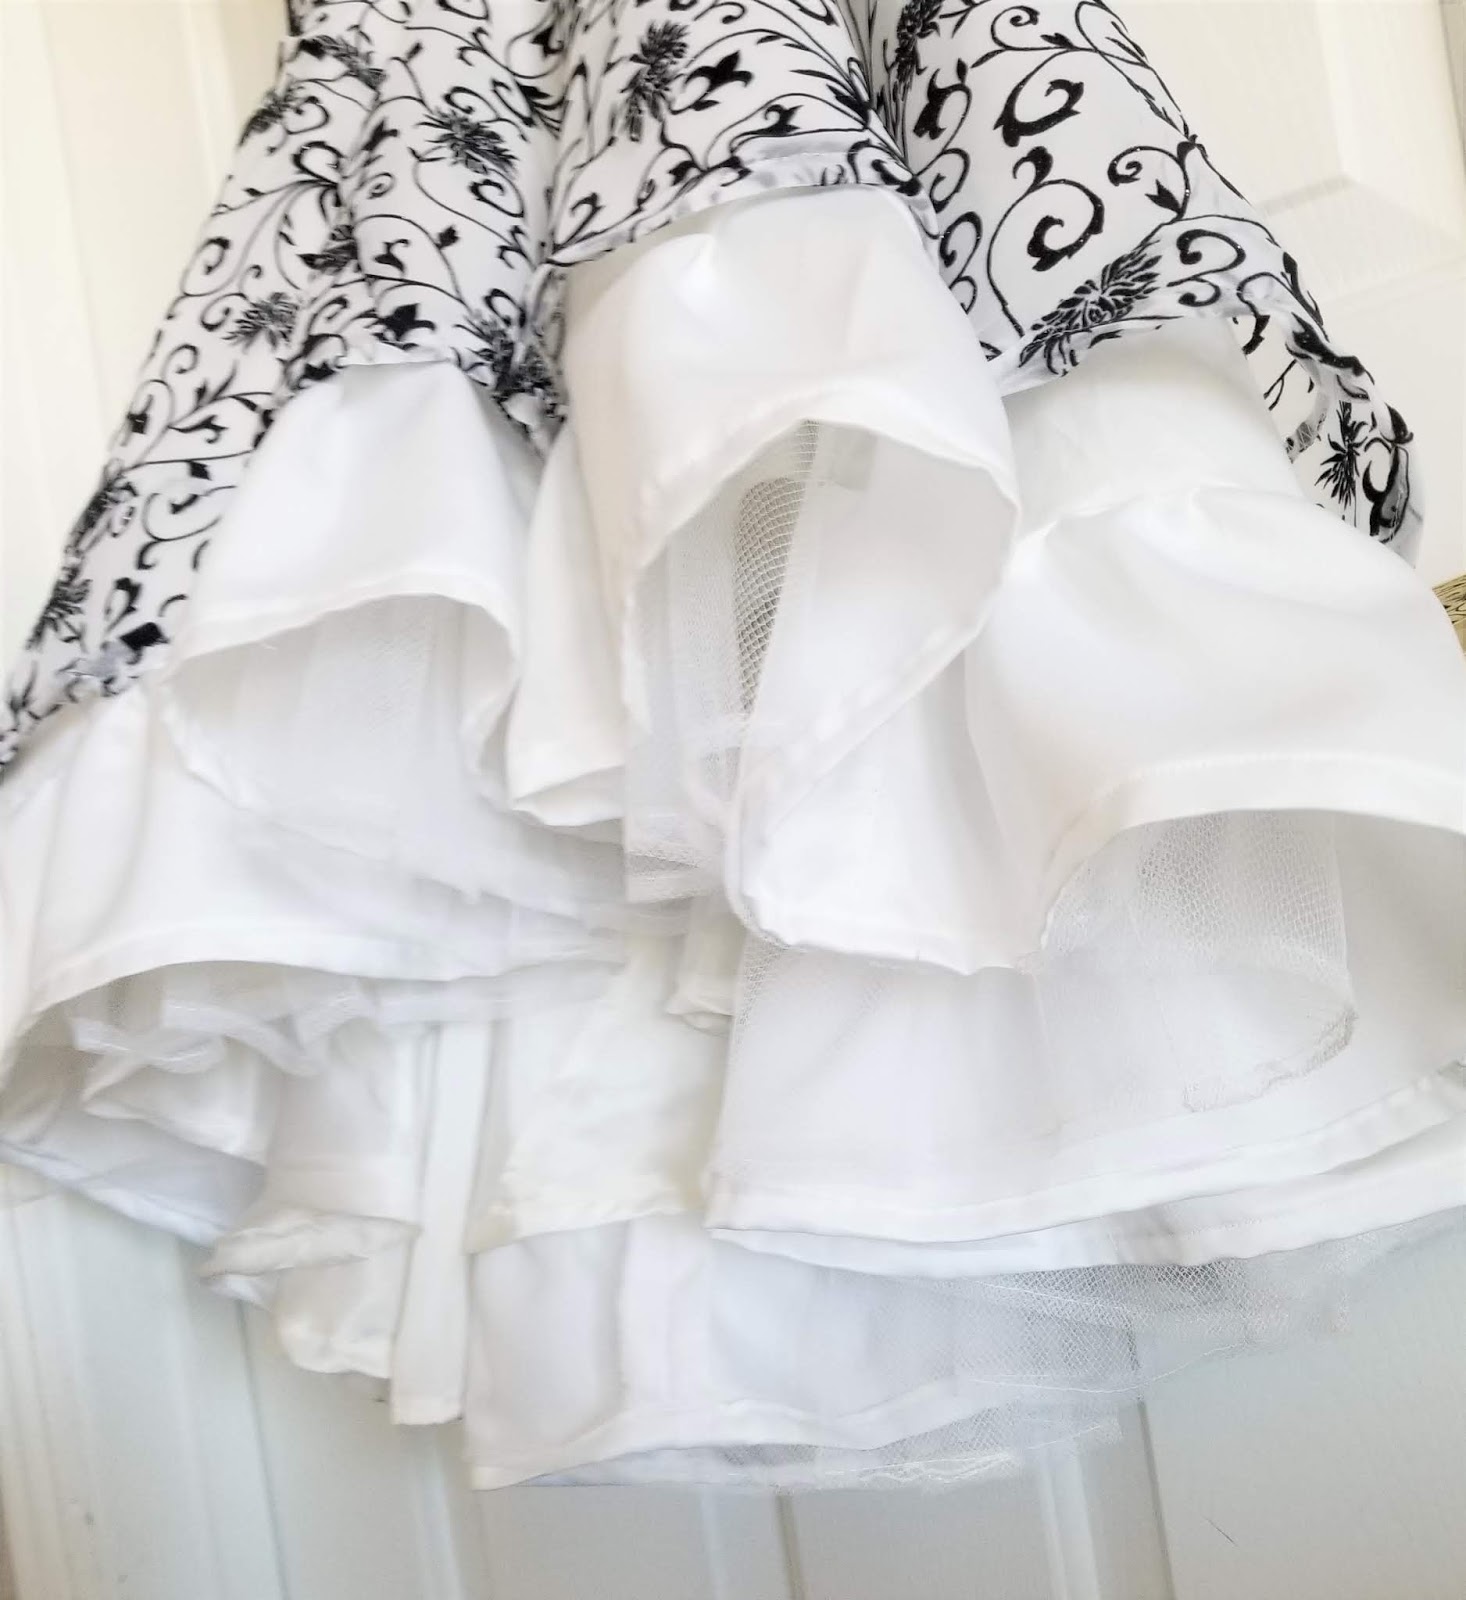 How to make a Petticoat Skirt (Underskirt)-Easy DIY Pattern - SewGuide